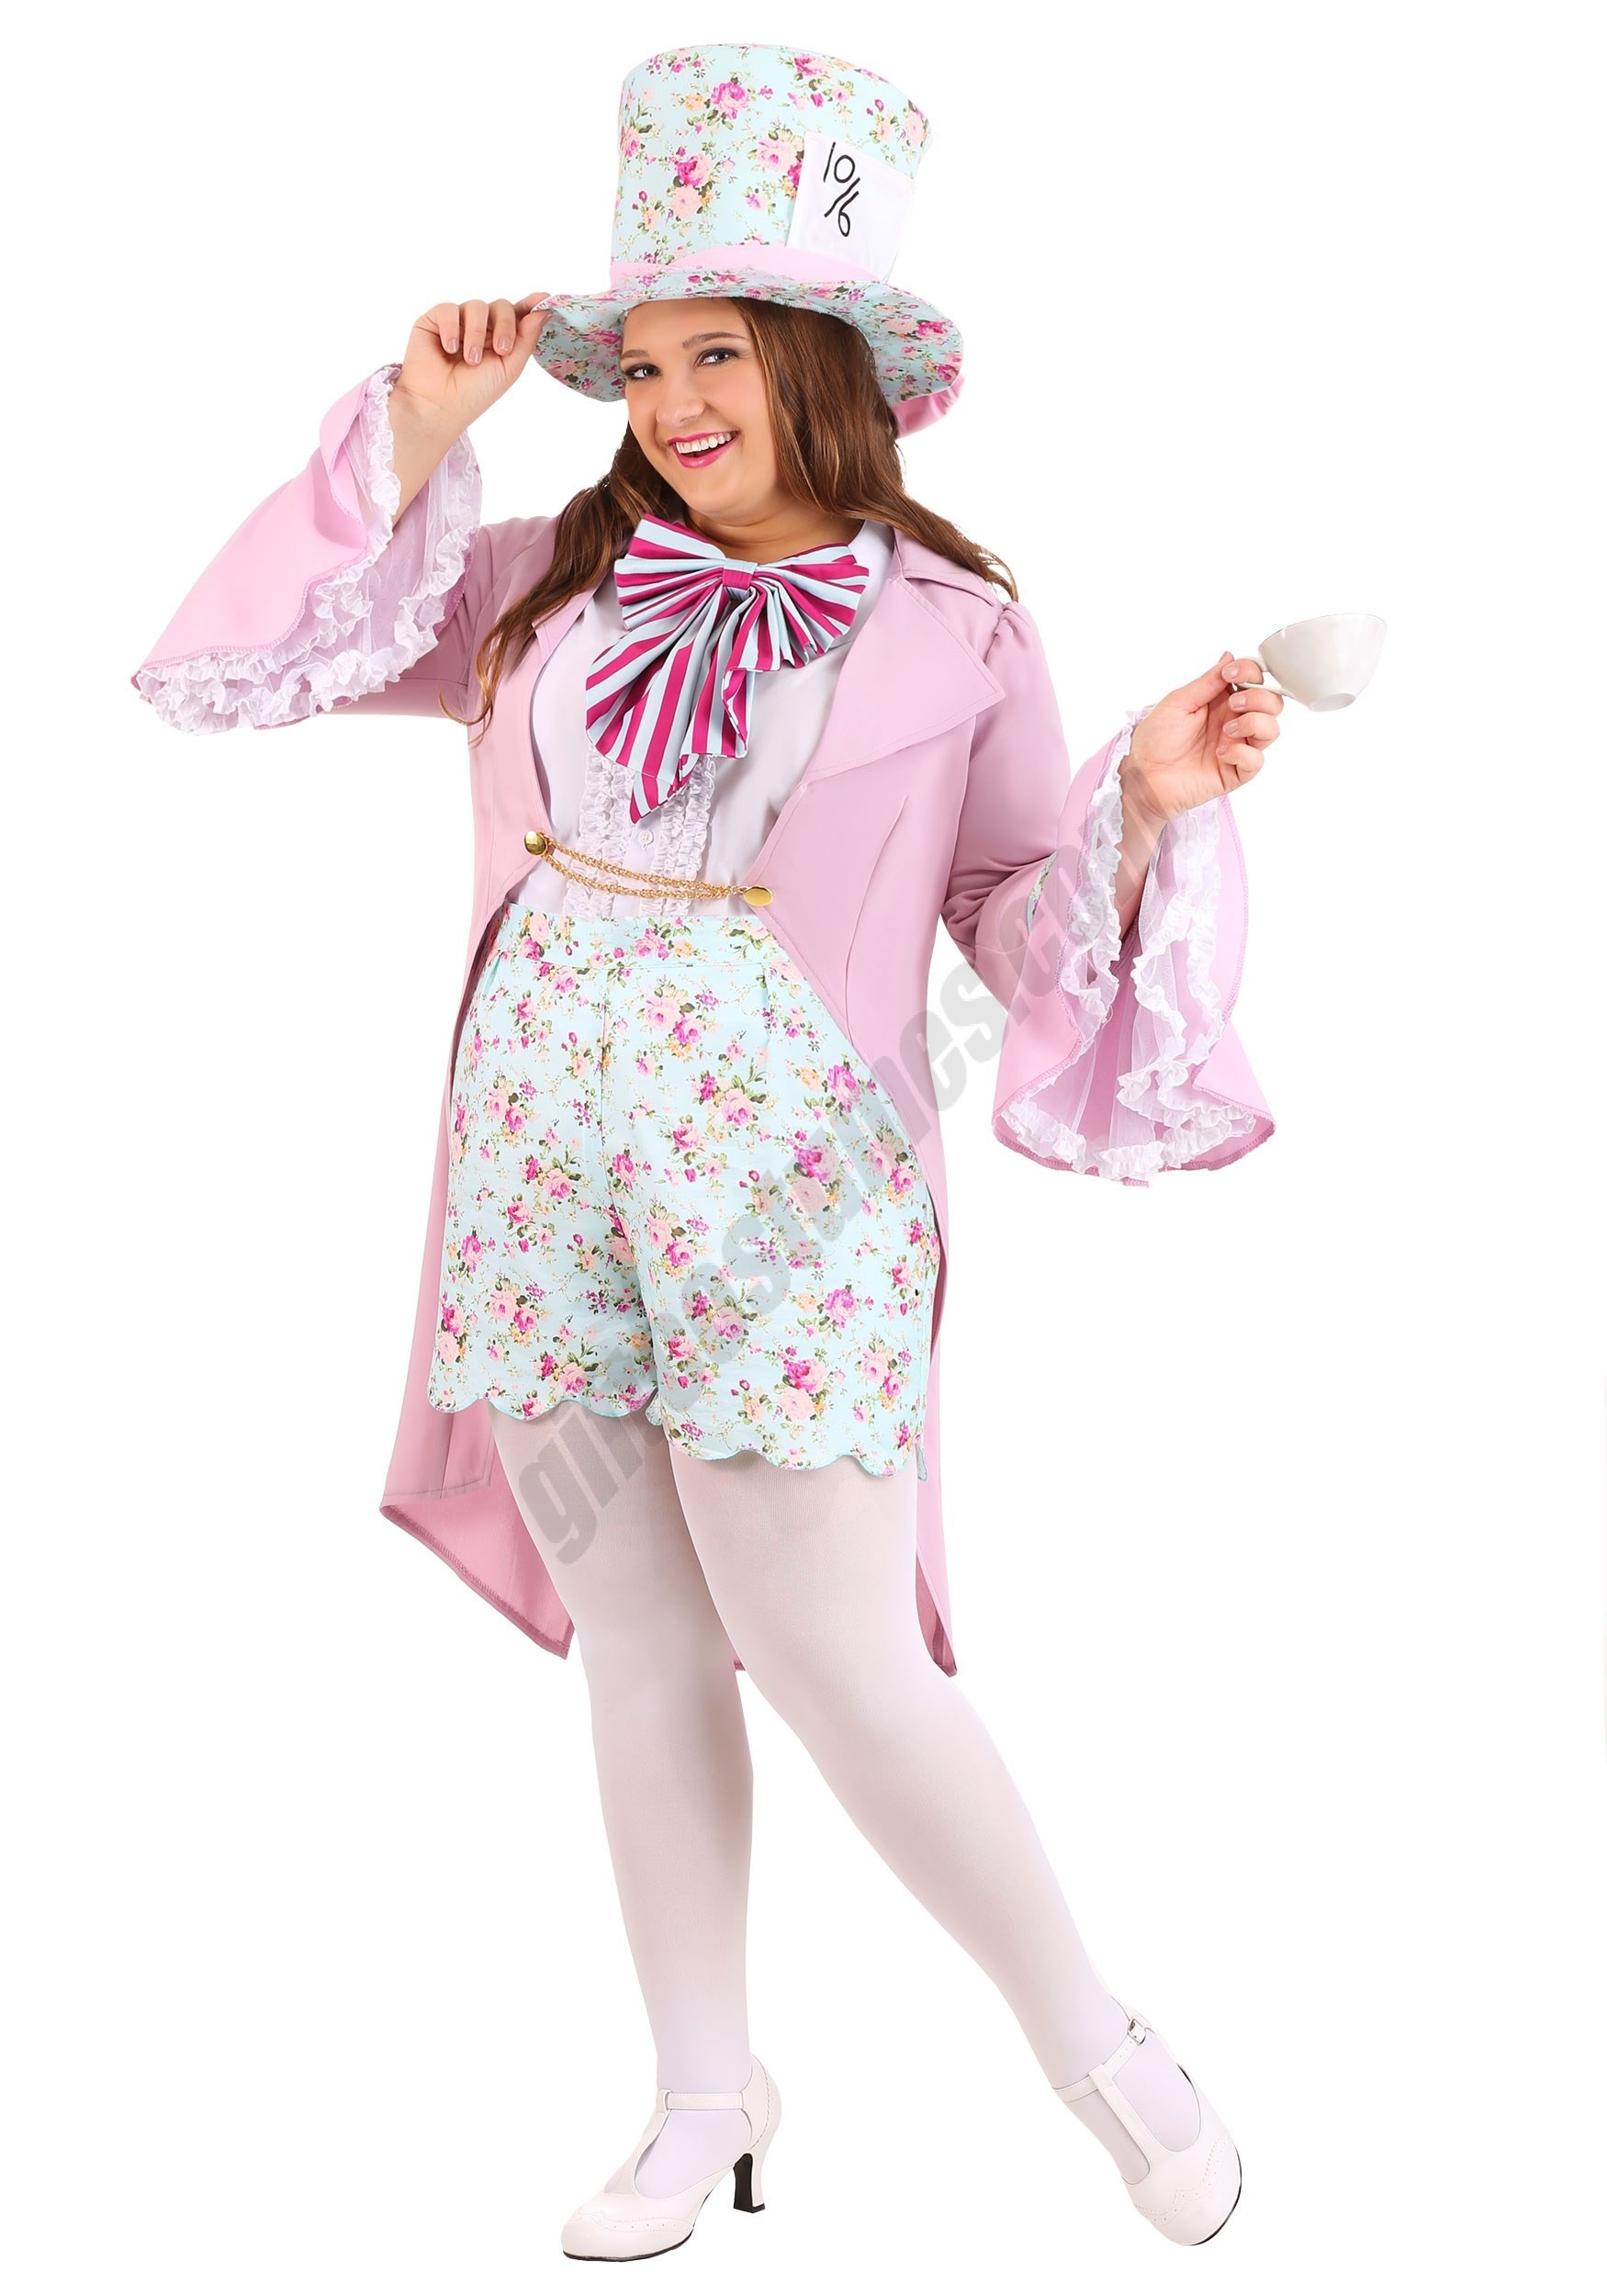 Plus Size Women's Pretty Mad Hatter Costume Promotions - Plus Size Women's Pretty Mad Hatter Costume Promotions